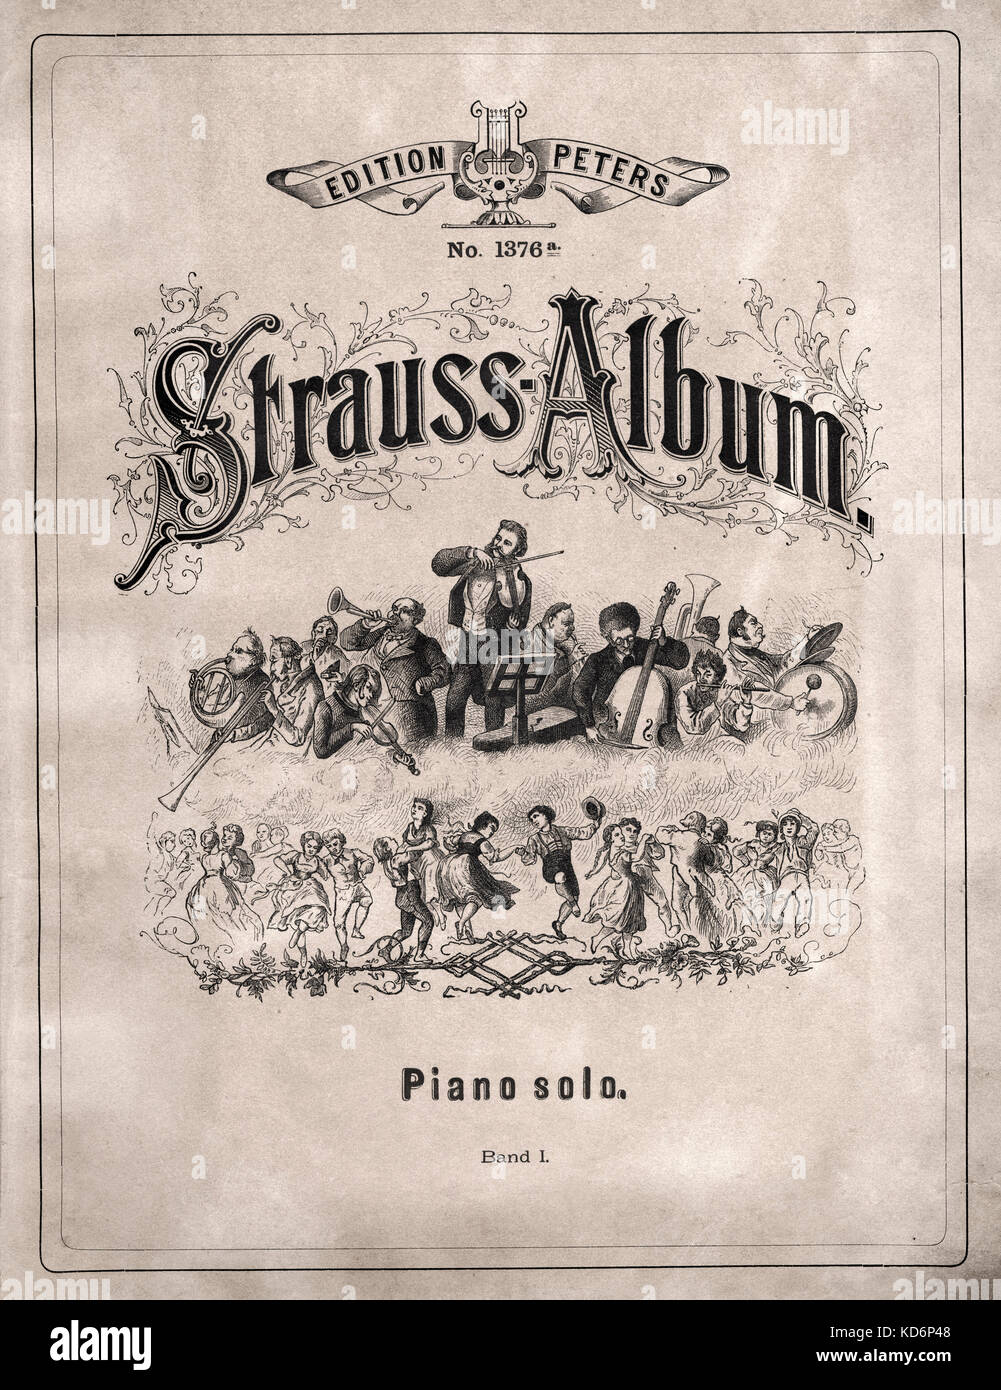 Strauss Album - Title page. Collection of dances by Johann, Josef  and Eduard Strauss Published by Hamburg aug. Granz  . Musicians playing instruments, violin, people dancing Stock Photo